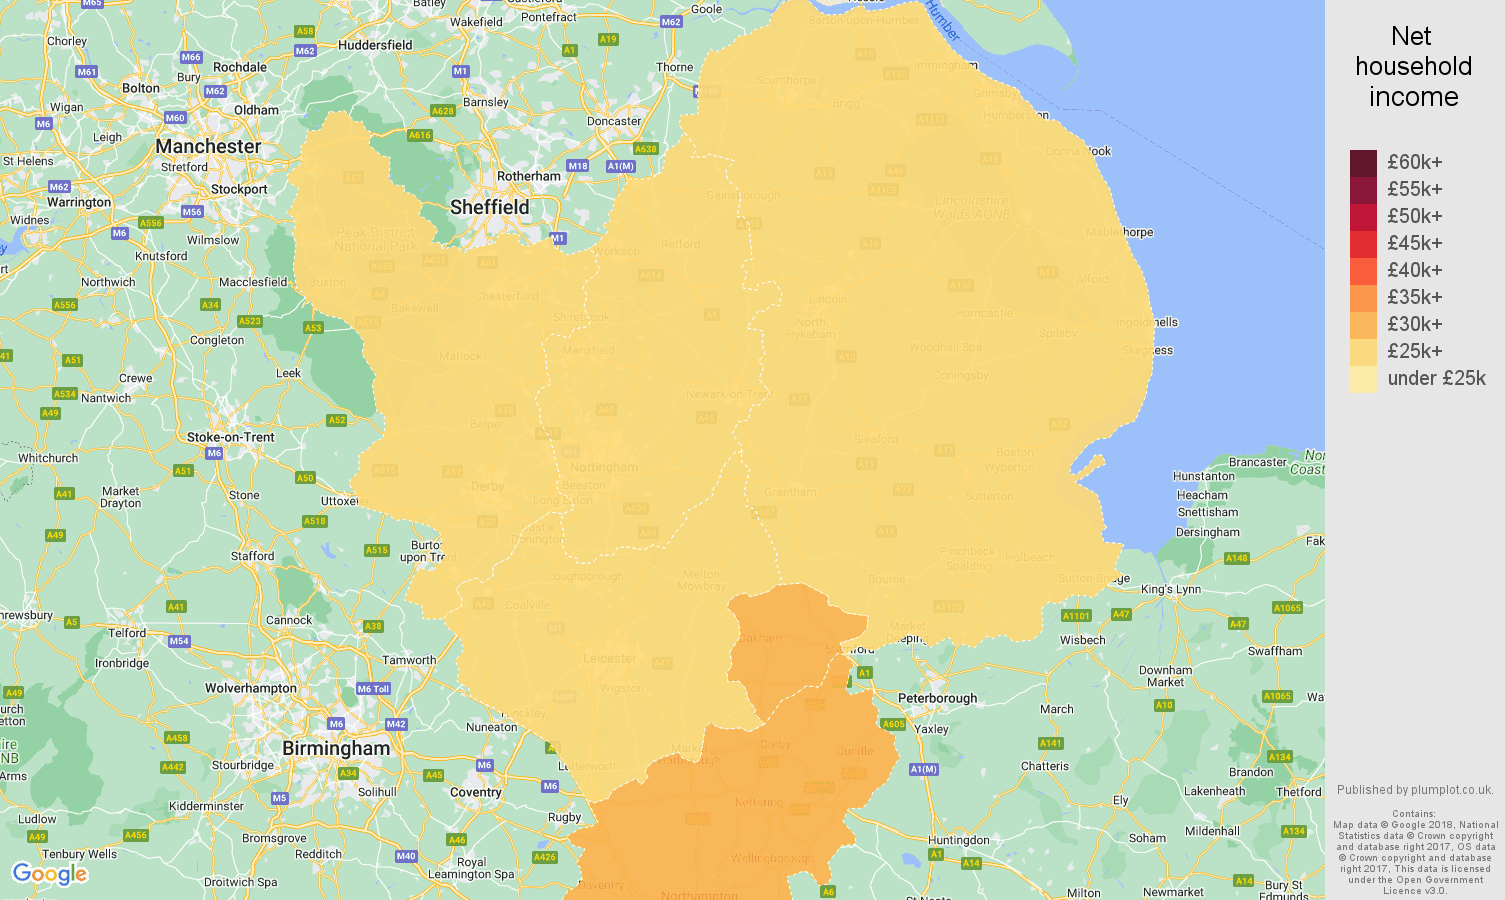 East Midlands net household income map